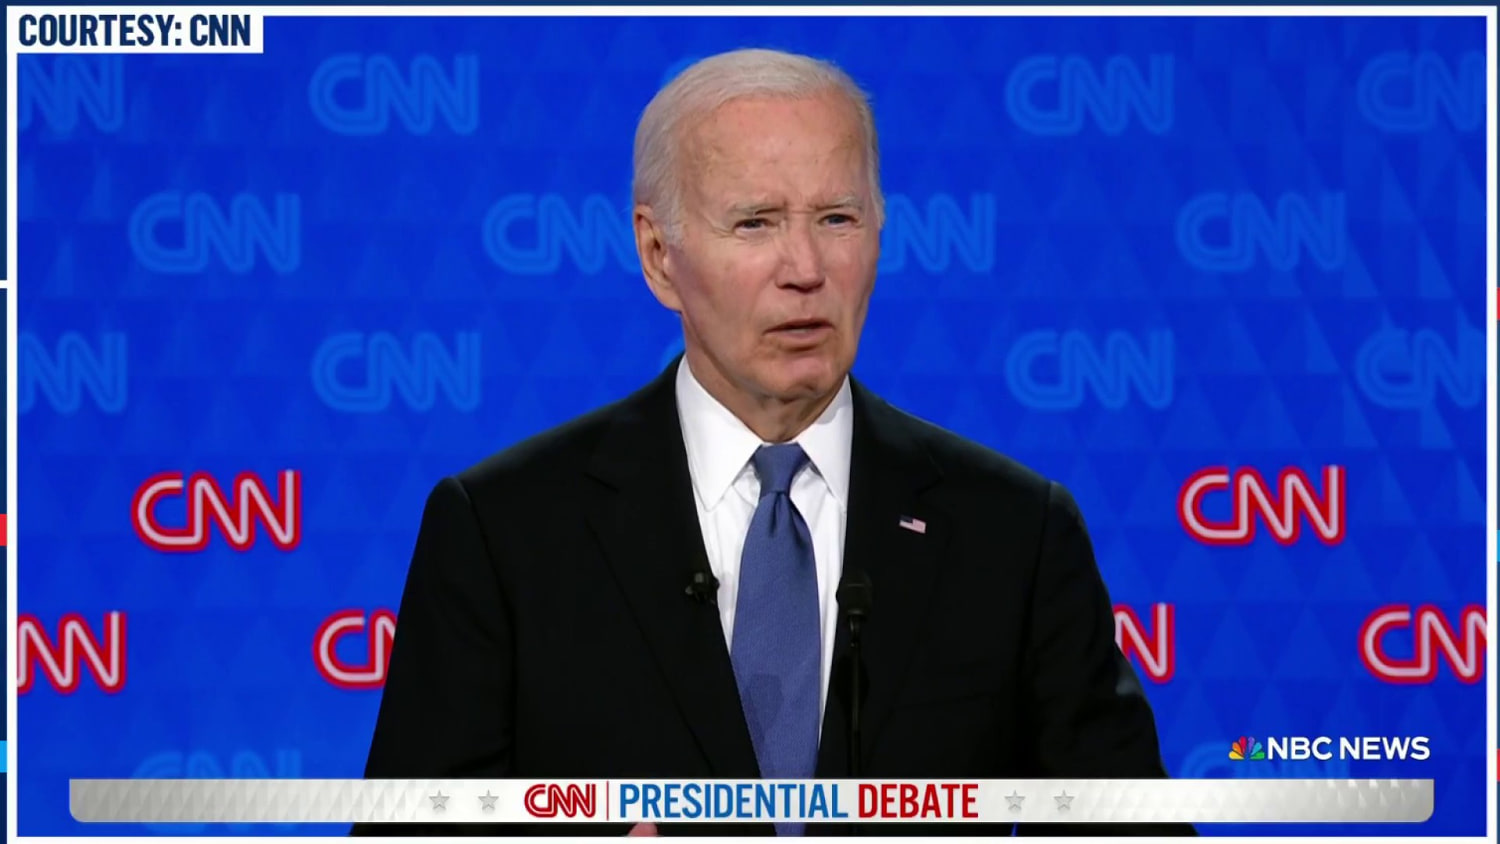 Biden returns to campaign trail as pressure grows after debate performance